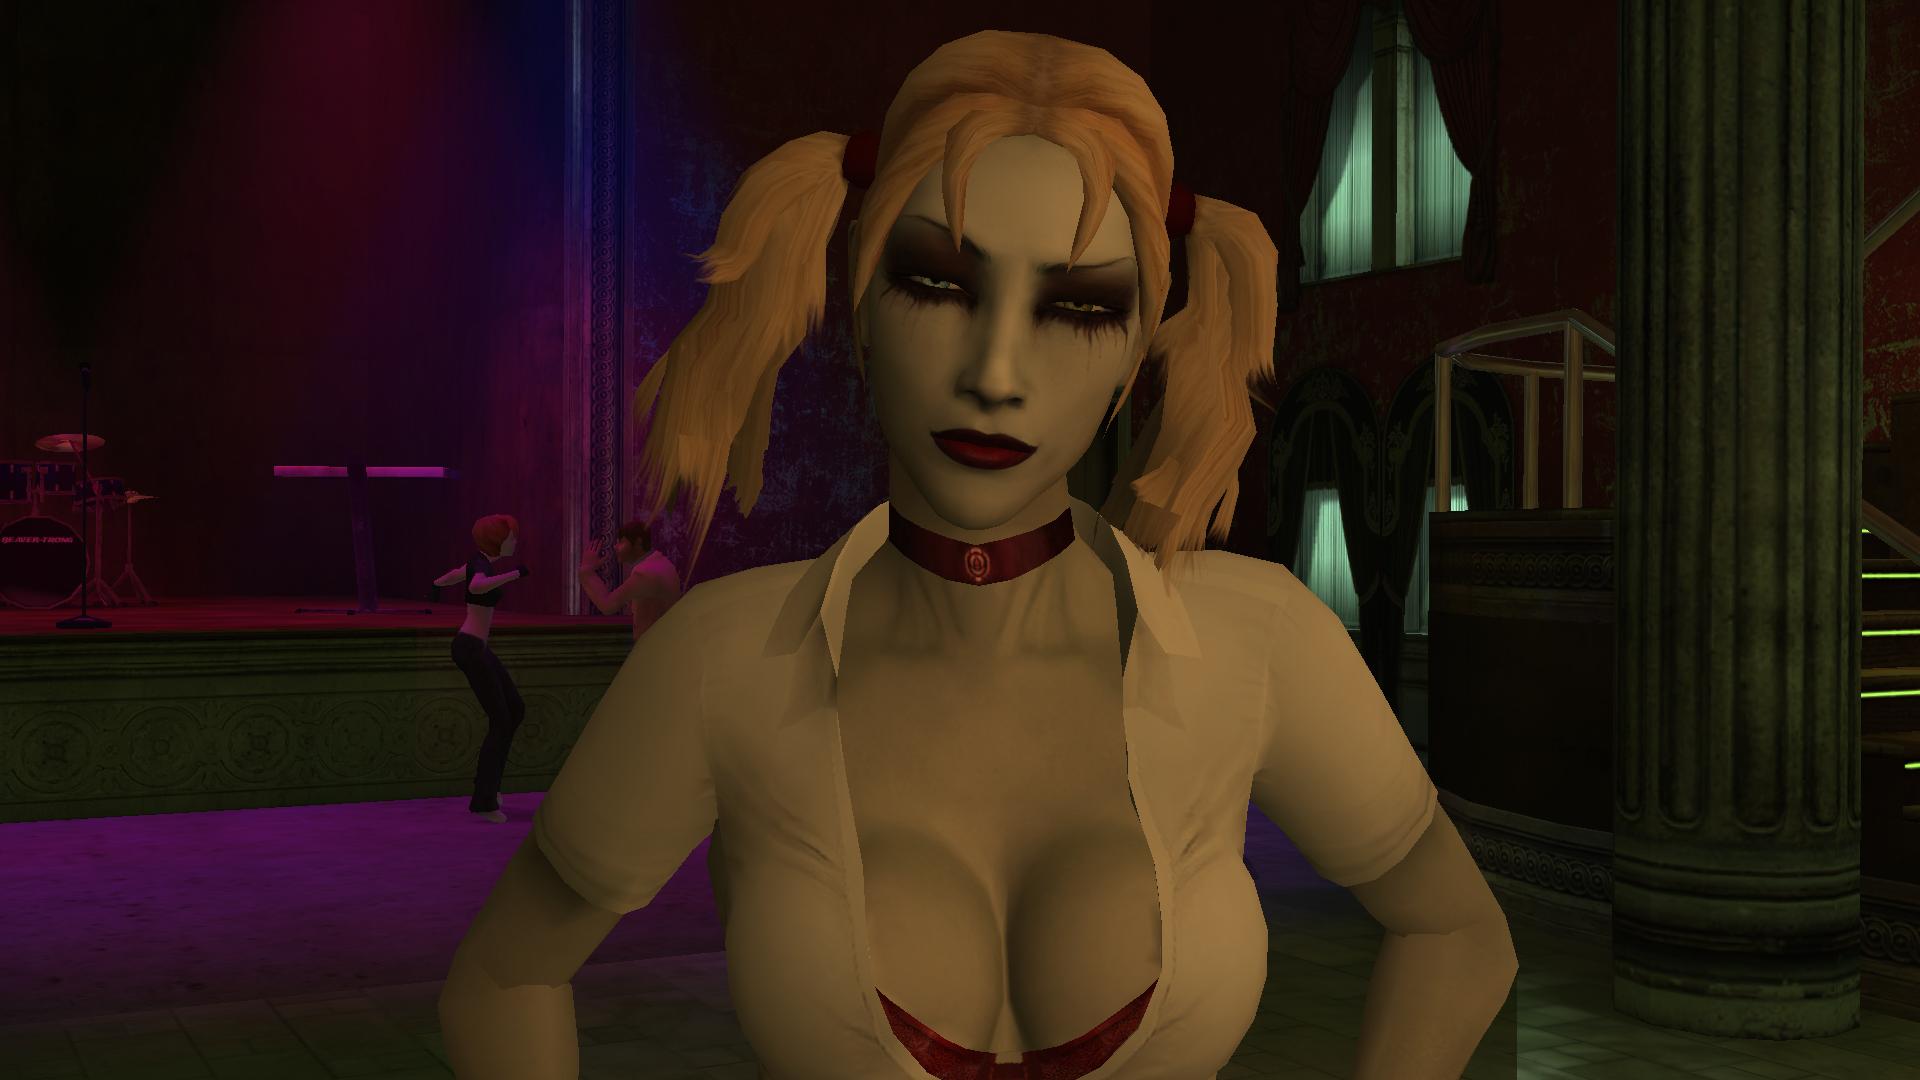 Vampire the masquerade bloodlines tips